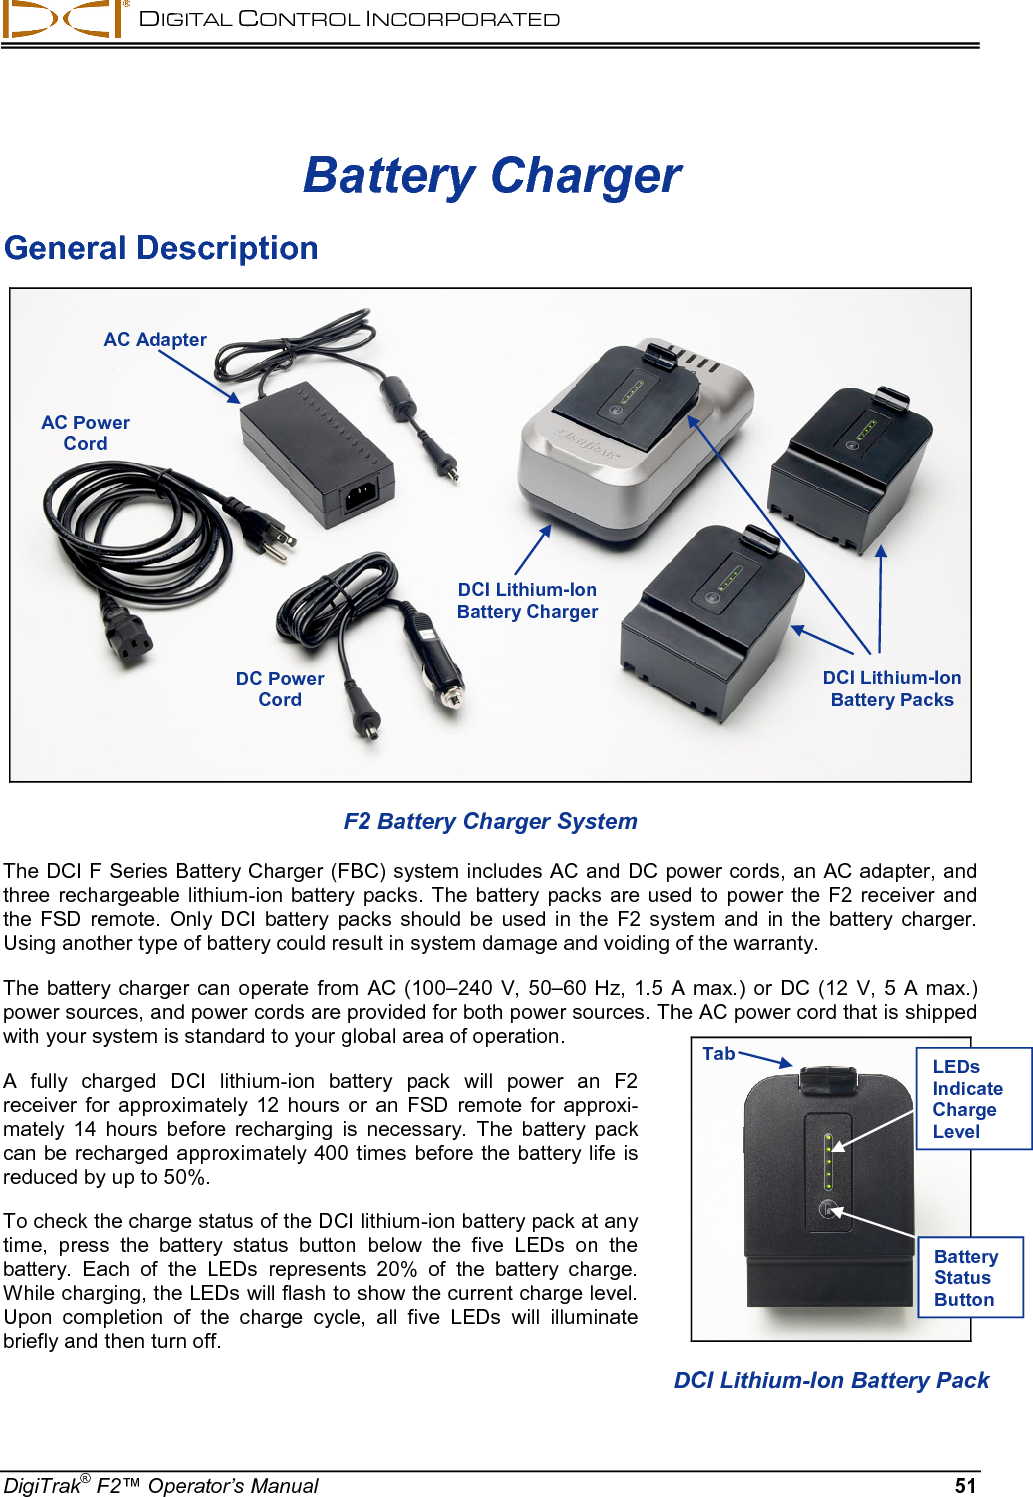  DIGITAL CONTROL INCORPORATED  DigiTrak® F2™ Operator’s Manual 51 Battery Charger General Description  F2 Battery Charger System The DCI F Series Battery Charger (FBC) system includes AC and DC power cords, an AC adapter, and three rechargeable lithium-ion battery packs. The battery packs are used to power the F2 receiver and the  FSD  remote. Only DCI battery packs should be used in the F2 system and in the battery charger. Using another type of battery could result in system damage and voiding of the warranty.  The battery charger can operate from AC (100–240 V, 50–60 Hz, 1.5 A max.) or DC (12 V, 5 A max.) power sources, and power cords are provided for both power sources. The AC power cord that is shipped with your system is standard to your global area of operation. A fully charged DCI  lithium-ion battery pack will power an F2 receiver for approximately 12 hours or an FSD remote for approxi-mately 14 hours before recharging is necessary.  The battery pack can be recharged  approximately 400 times  before the battery life is reduced by up to 50%. To check the charge status of the DCI lithium-ion battery pack at any time, press the battery status button below the five LEDs on the battery.  Each of the LEDs represents 20% of the battery charge. While charging, the LEDs will flash to show the current charge level. Upon  completion of the charge cycle, all five LEDs will illuminate briefly and then turn off.  AC Adapter AC Power Cord DCI Lithium-Ion Battery Charger DCI Lithium-Ion Battery Packs  DC Power Cord   DCI Lithium-Ion Battery Pack Tab LEDs Indicate Charge Level Battery Status Button 